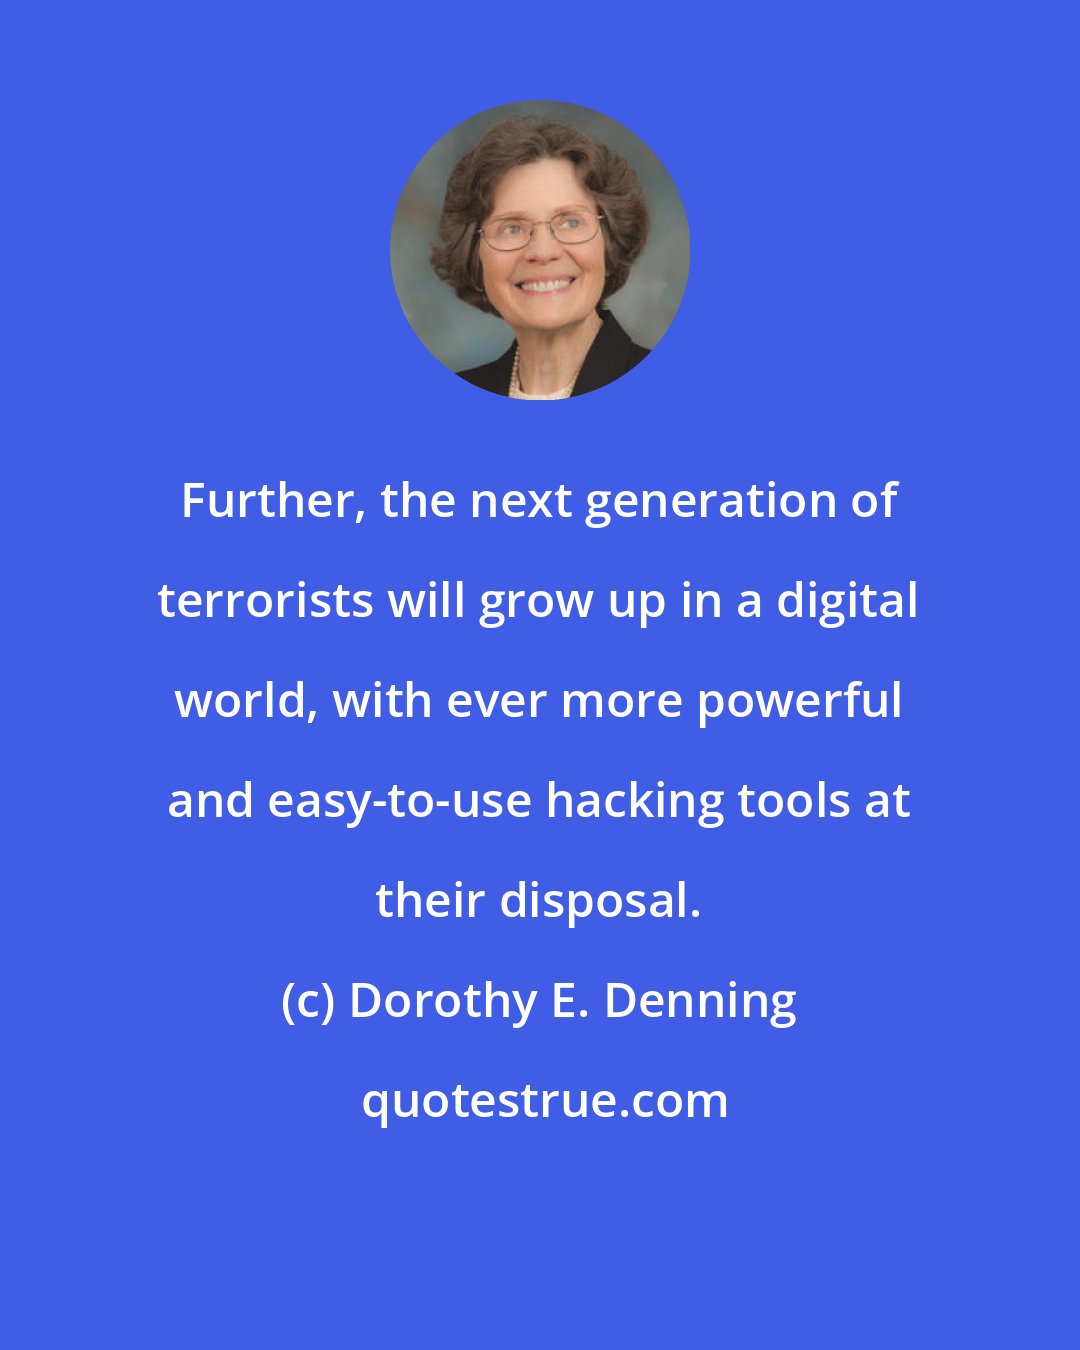 Dorothy E. Denning: Further, the next generation of terrorists will grow up in a digital world, with ever more powerful and easy-to-use hacking tools at their disposal.